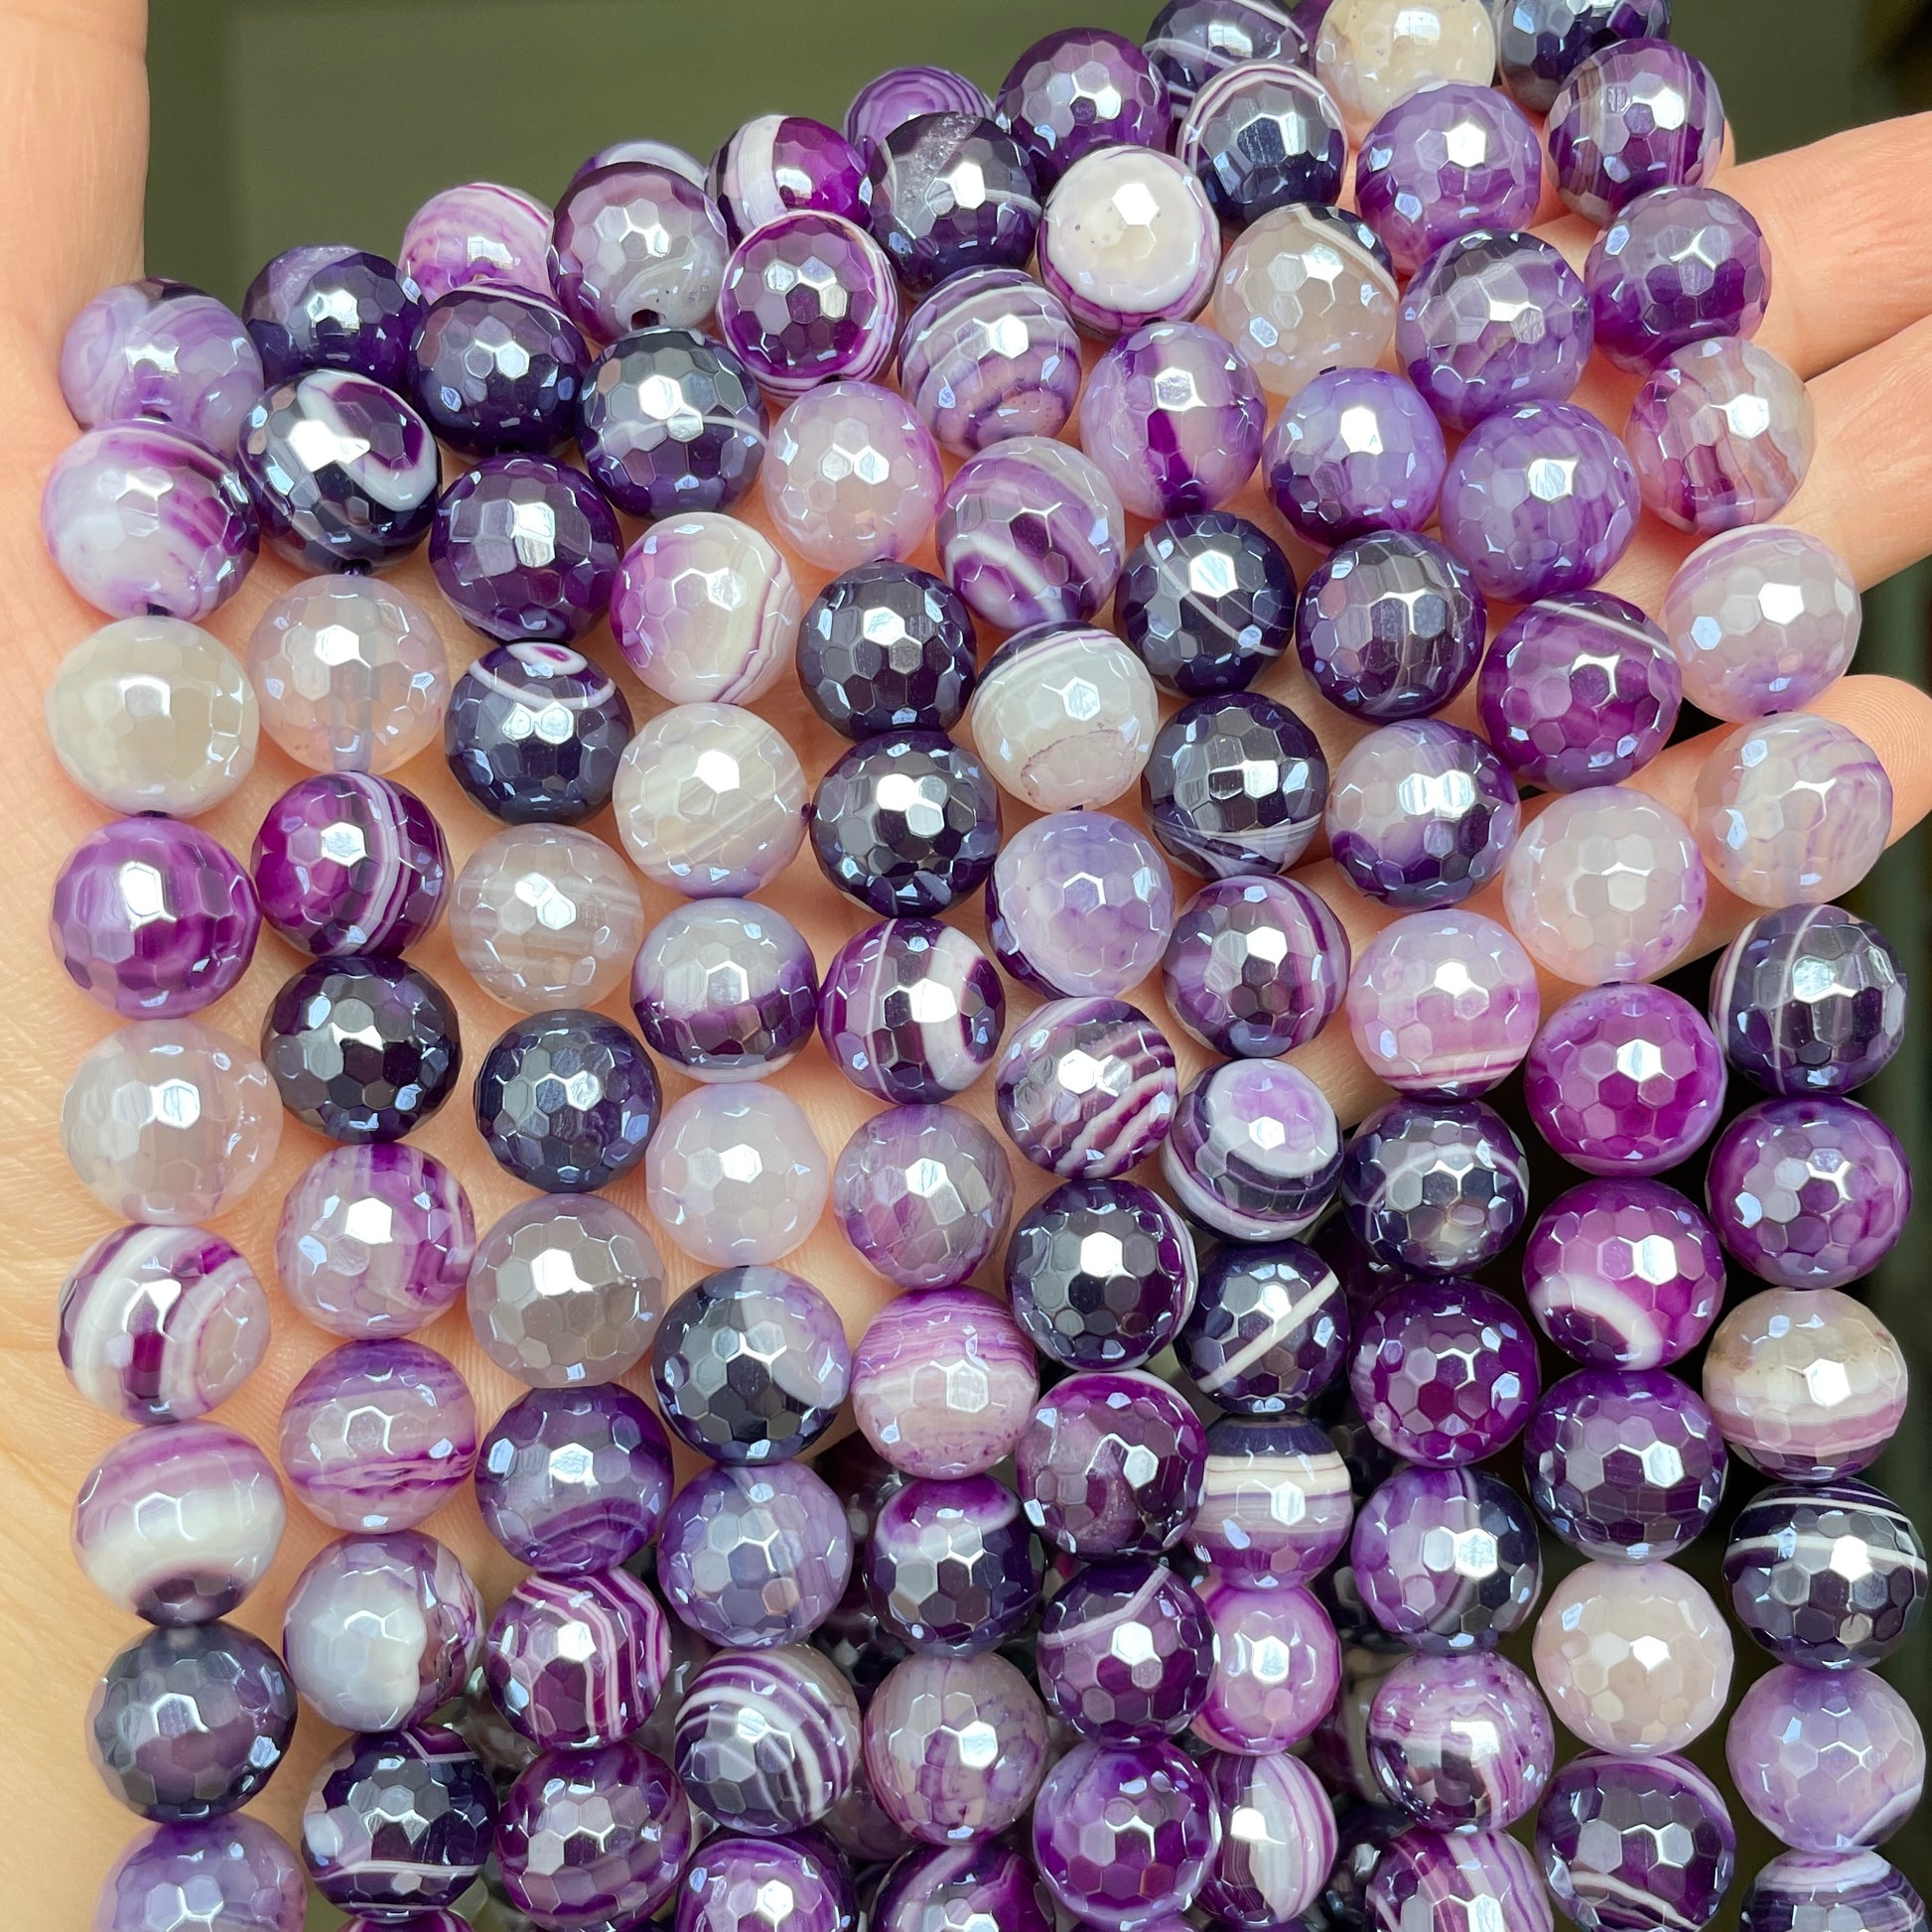 12mm/14mm Big Hole Round Beads Charms Natural Stone Agates Large Hole Beads  for Jewelry Making Necklace Earring Accessories